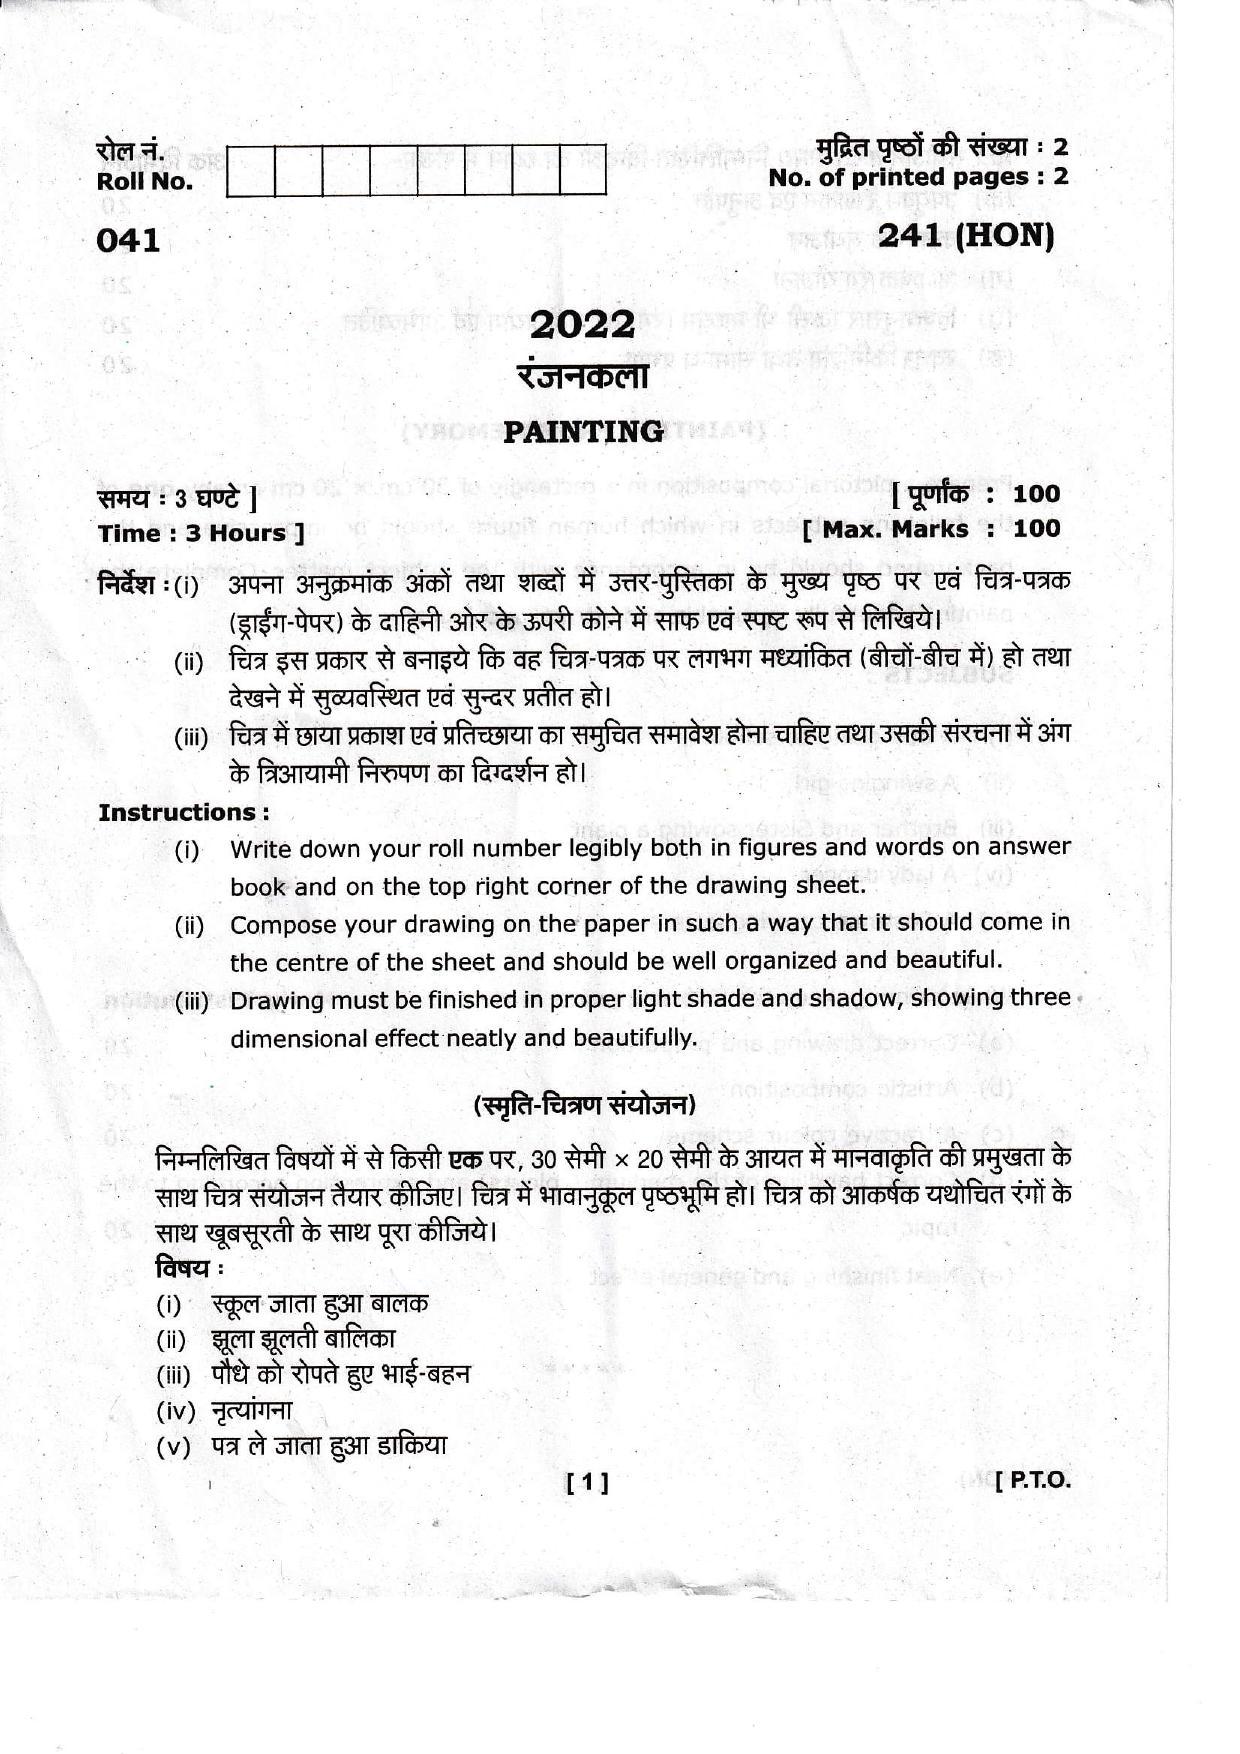 Haryana Board HBSE Class 10 Drawing Instruction One Day 2018 Question Paper  - IndCareer Docs